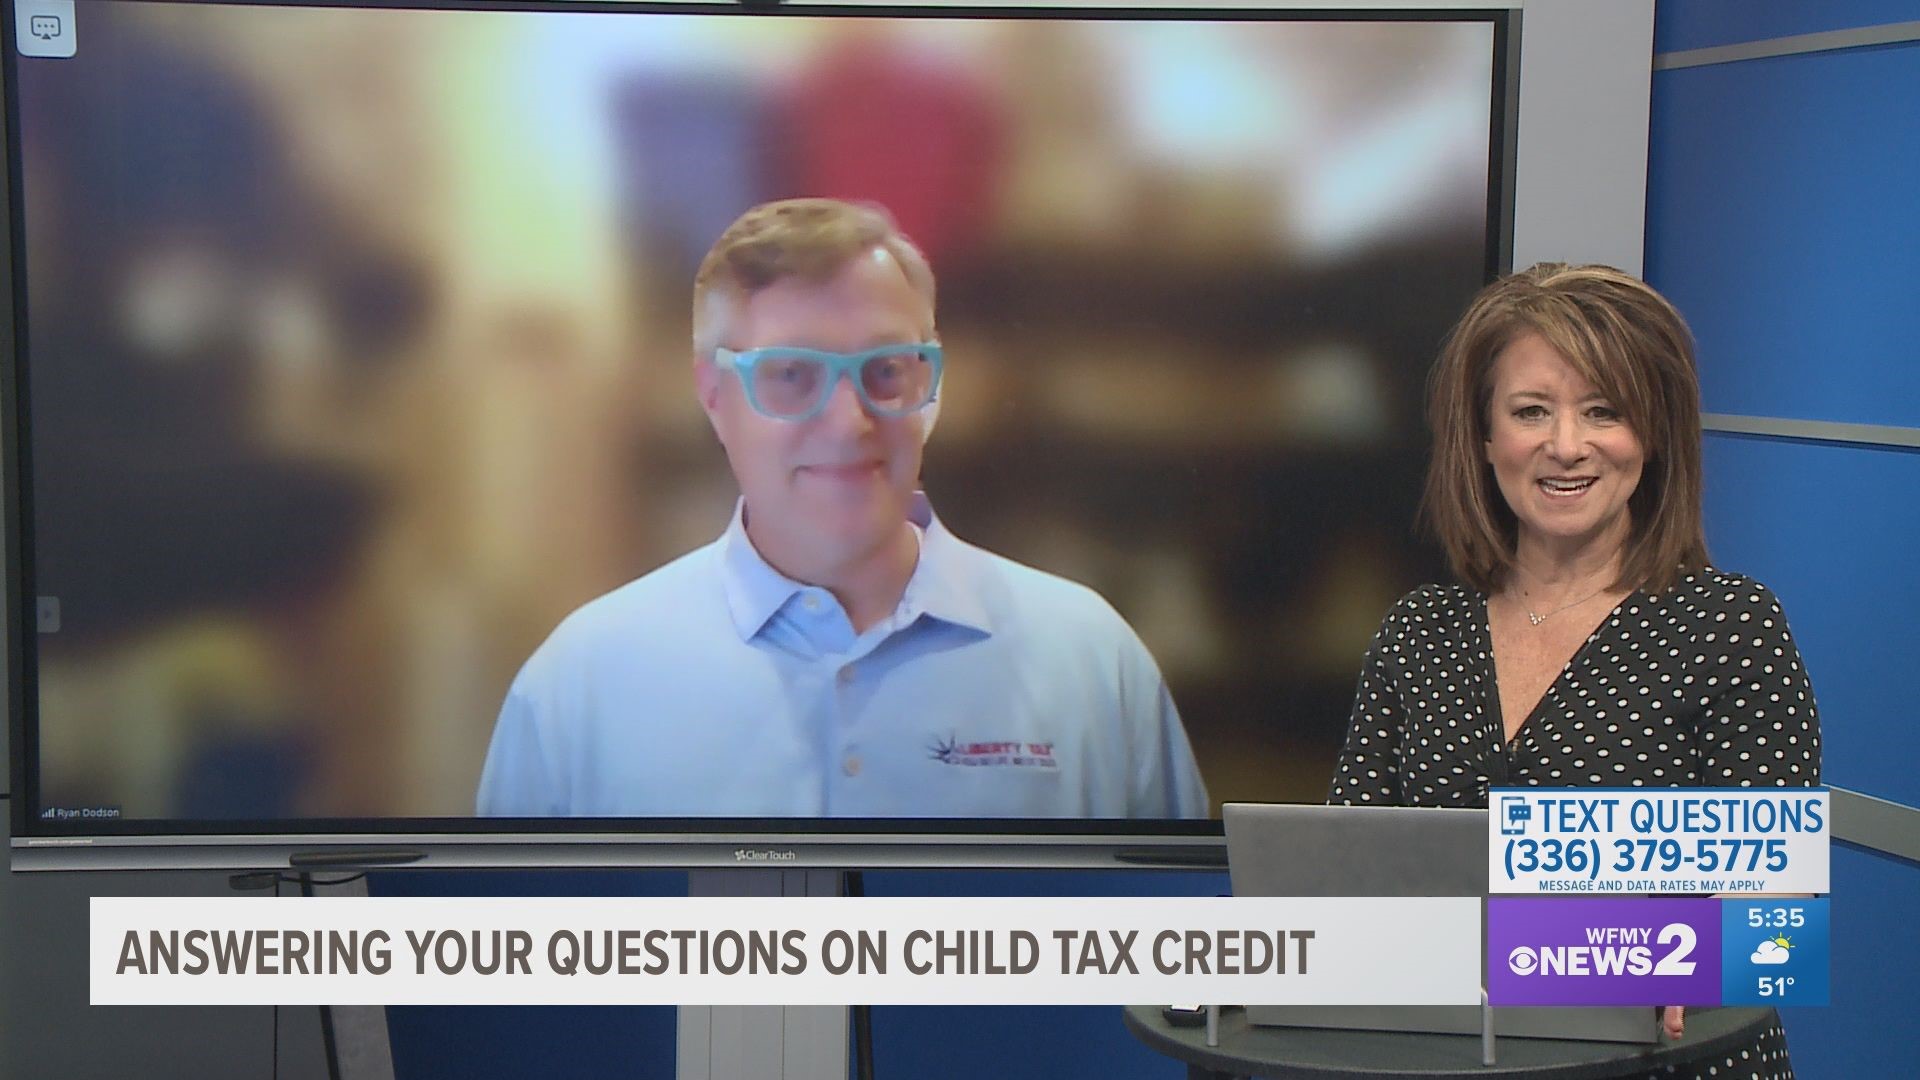 The final child tax credit payments go out Wednesday. We spoke with a tax expert to answer your questions.